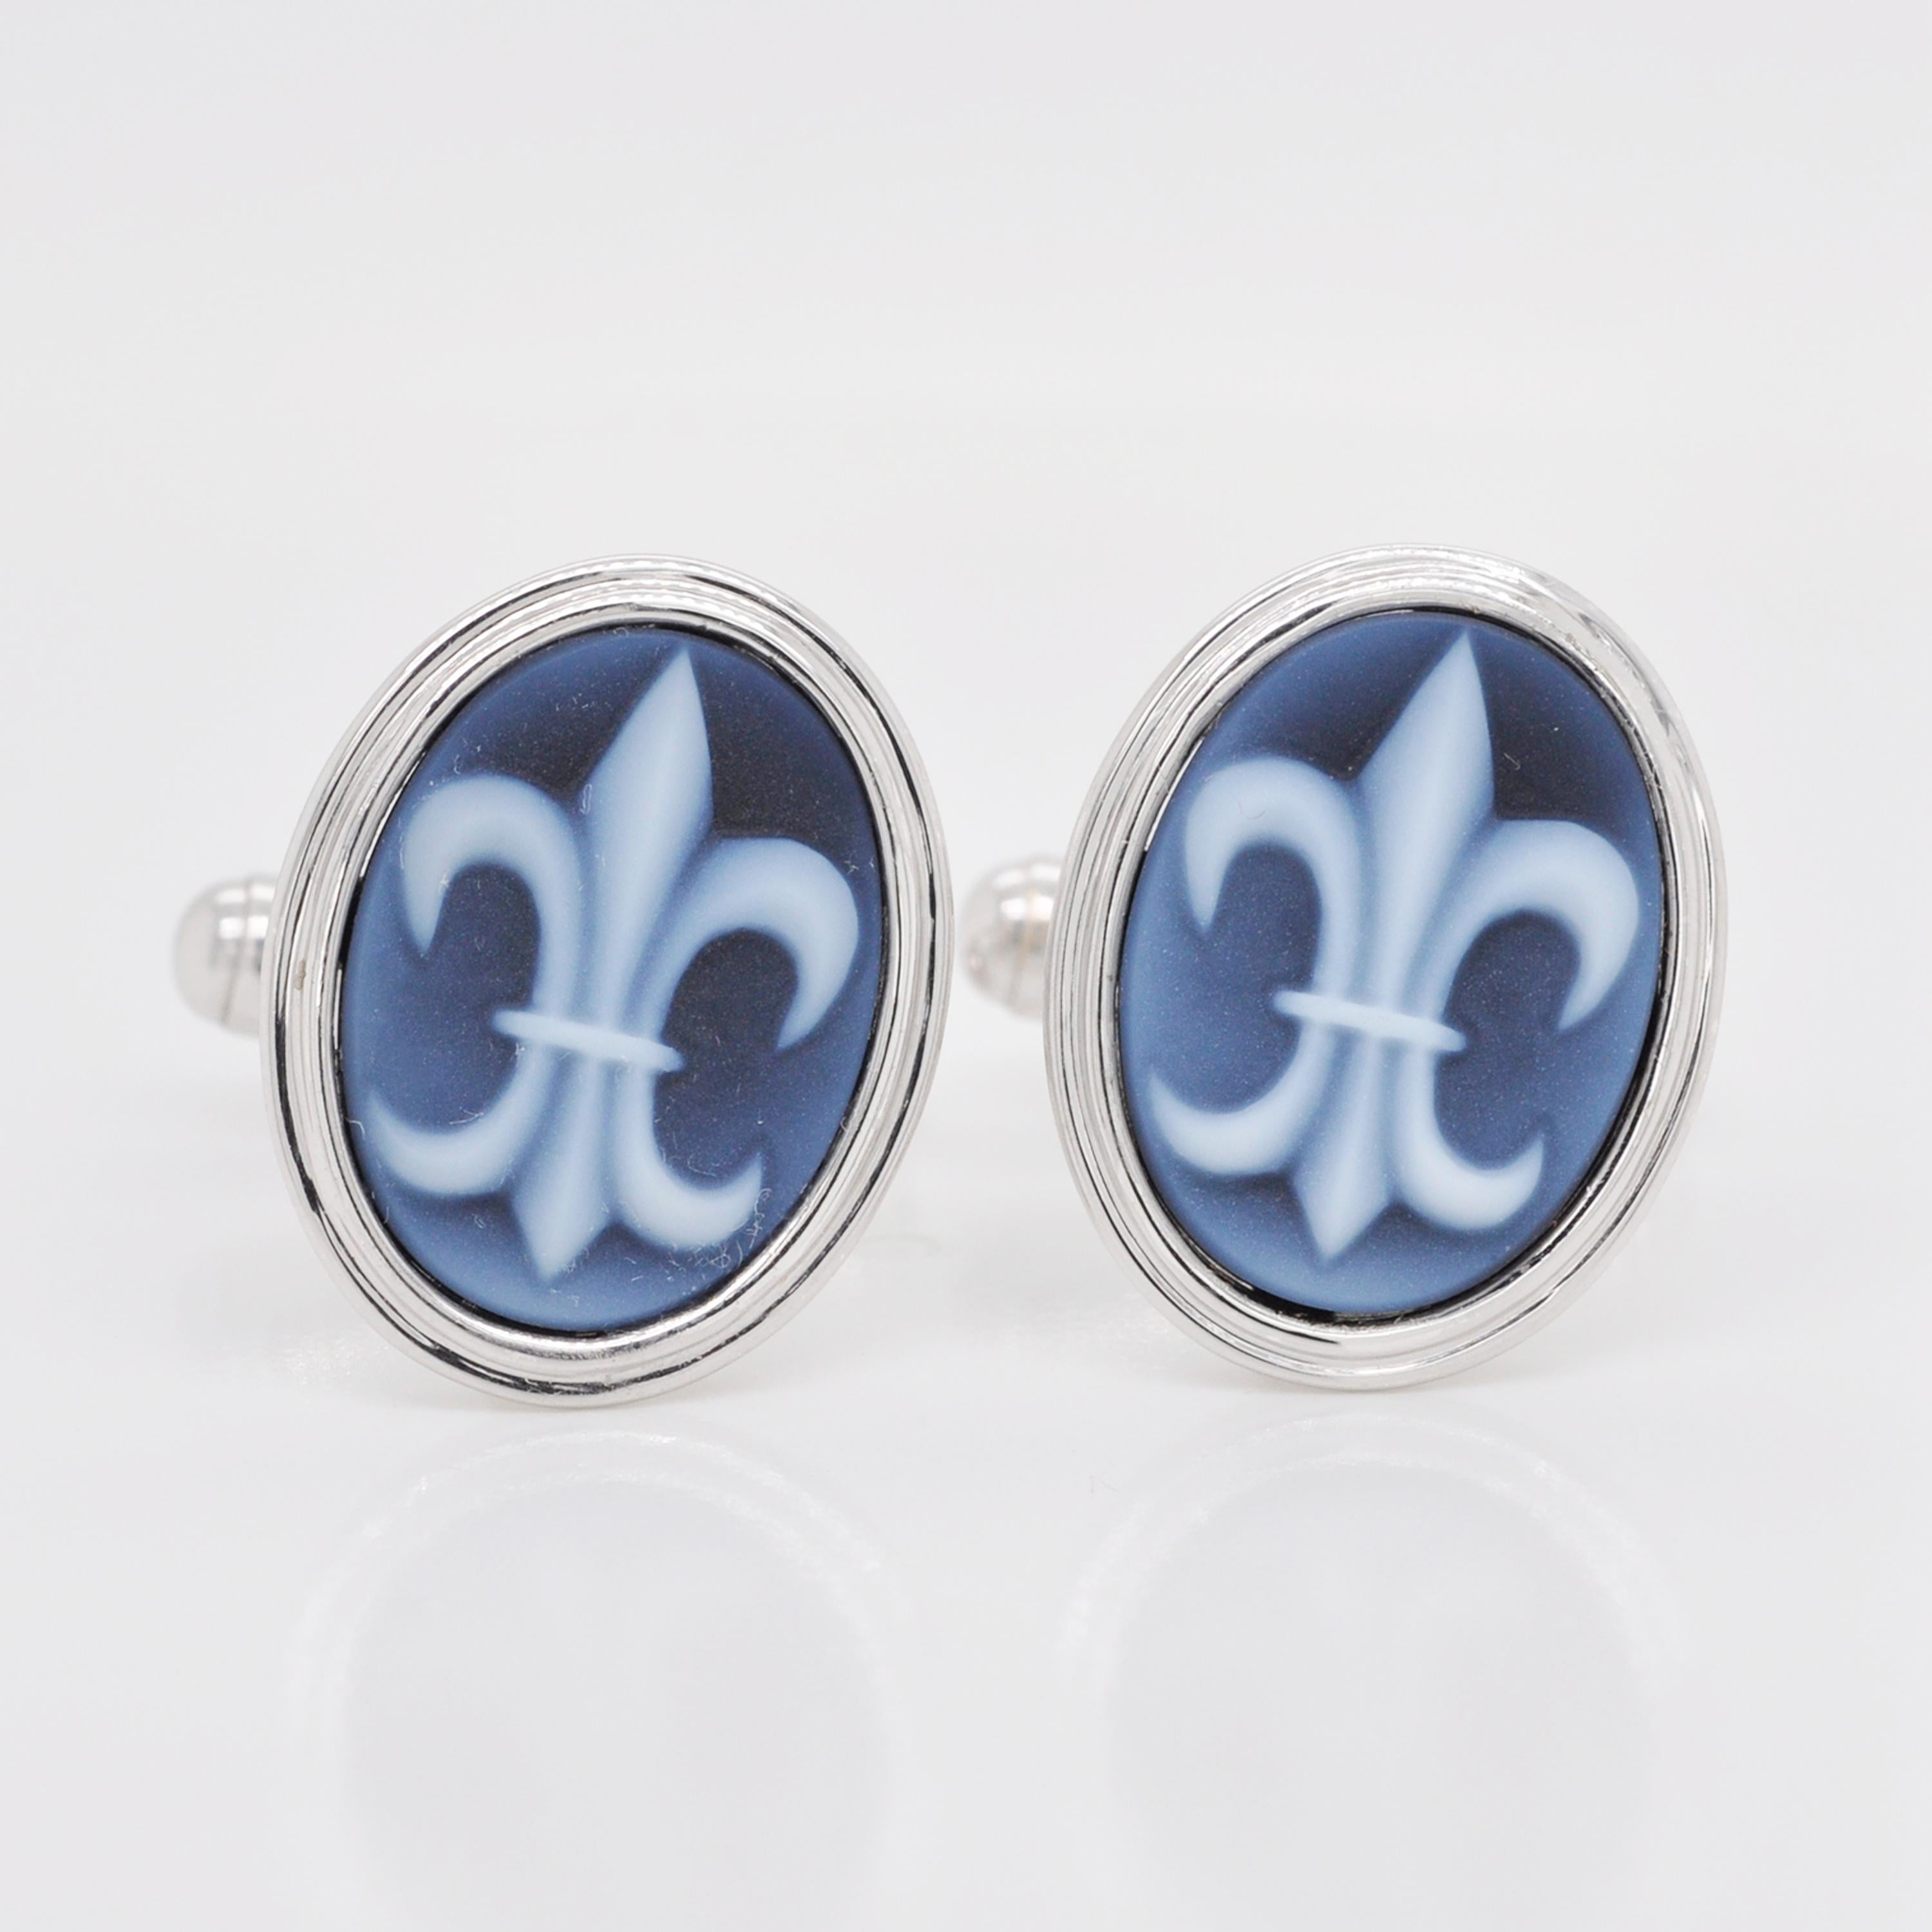 Royal symbol fleur-de-lis agate carving sterling silver gemstone cufflinks are one of the most attractive pieces for men's accessories. This symbol of unity depicting that our lives are tied together with eternal love is captured by an intricate